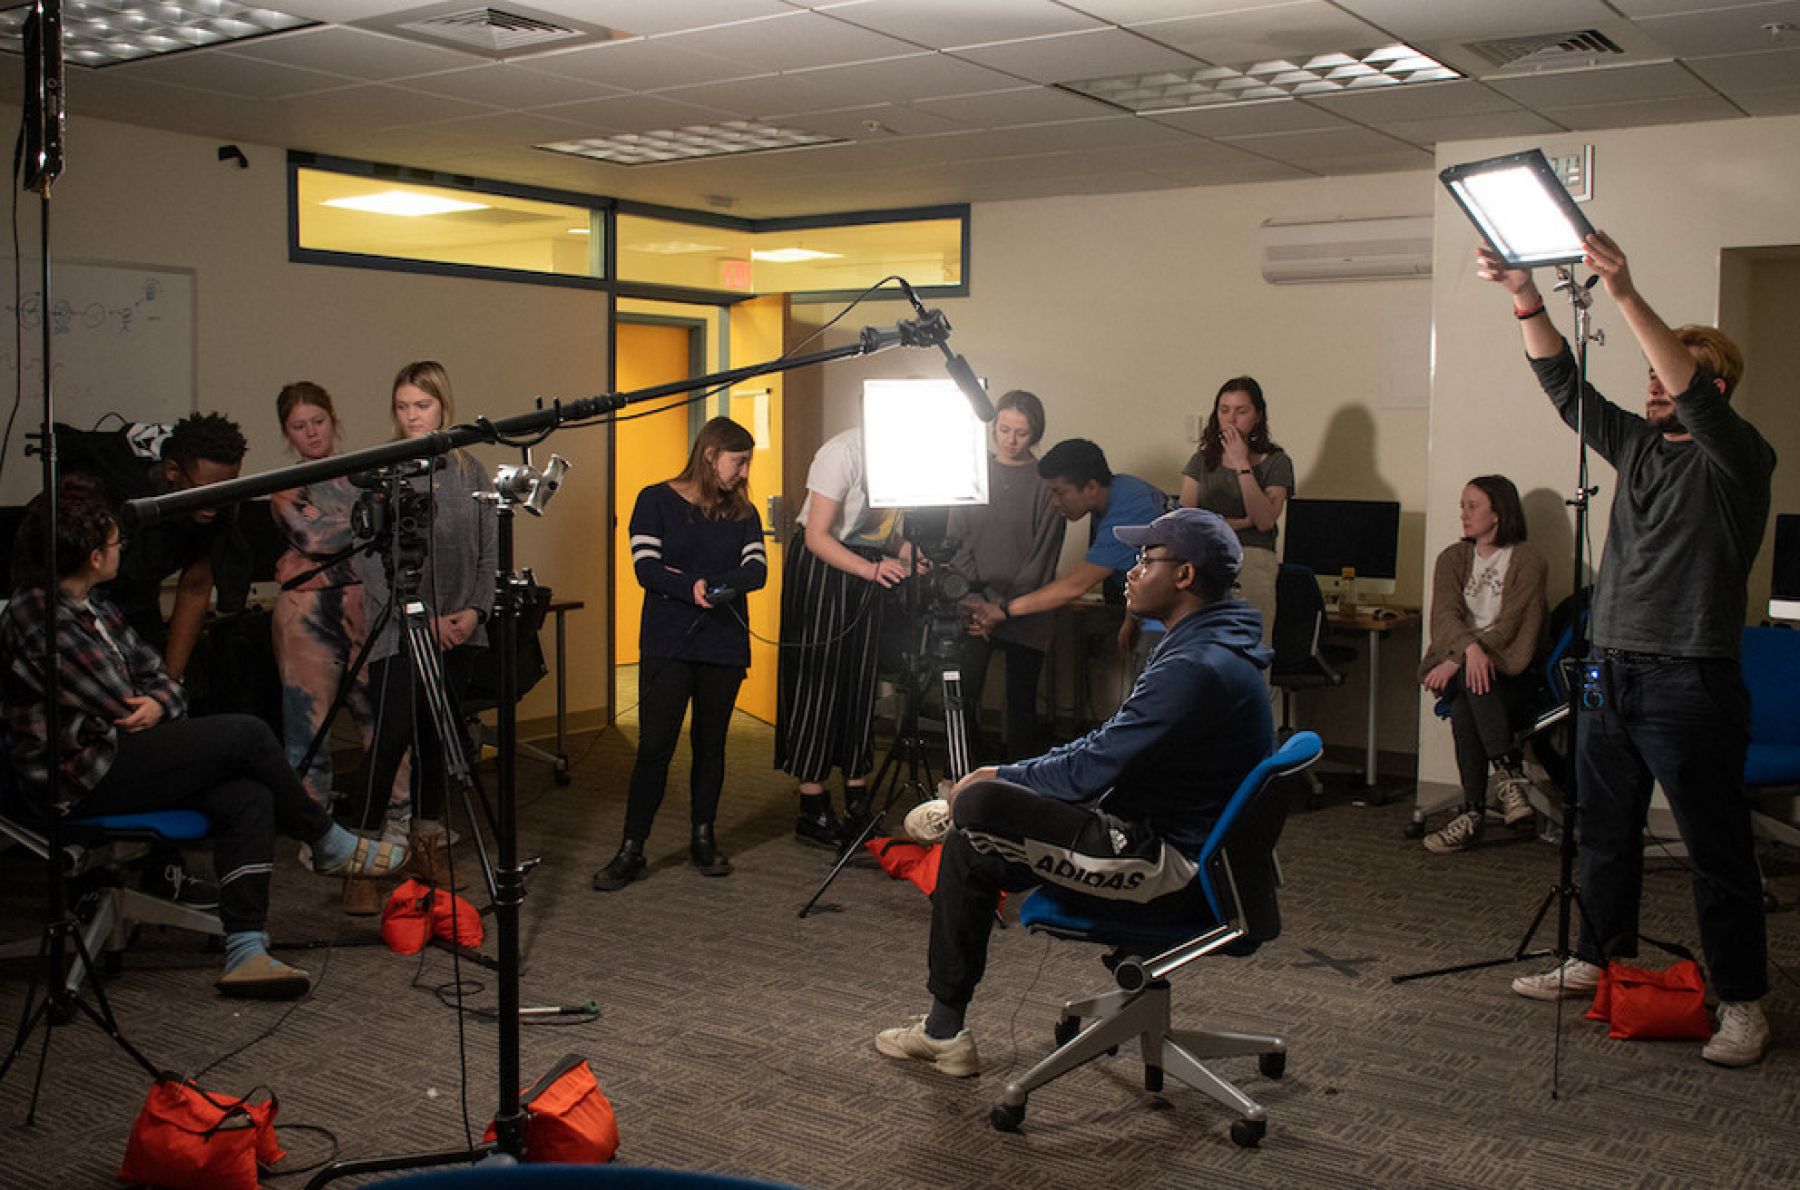 CommAgency students on set with lights and camera for a shoot.